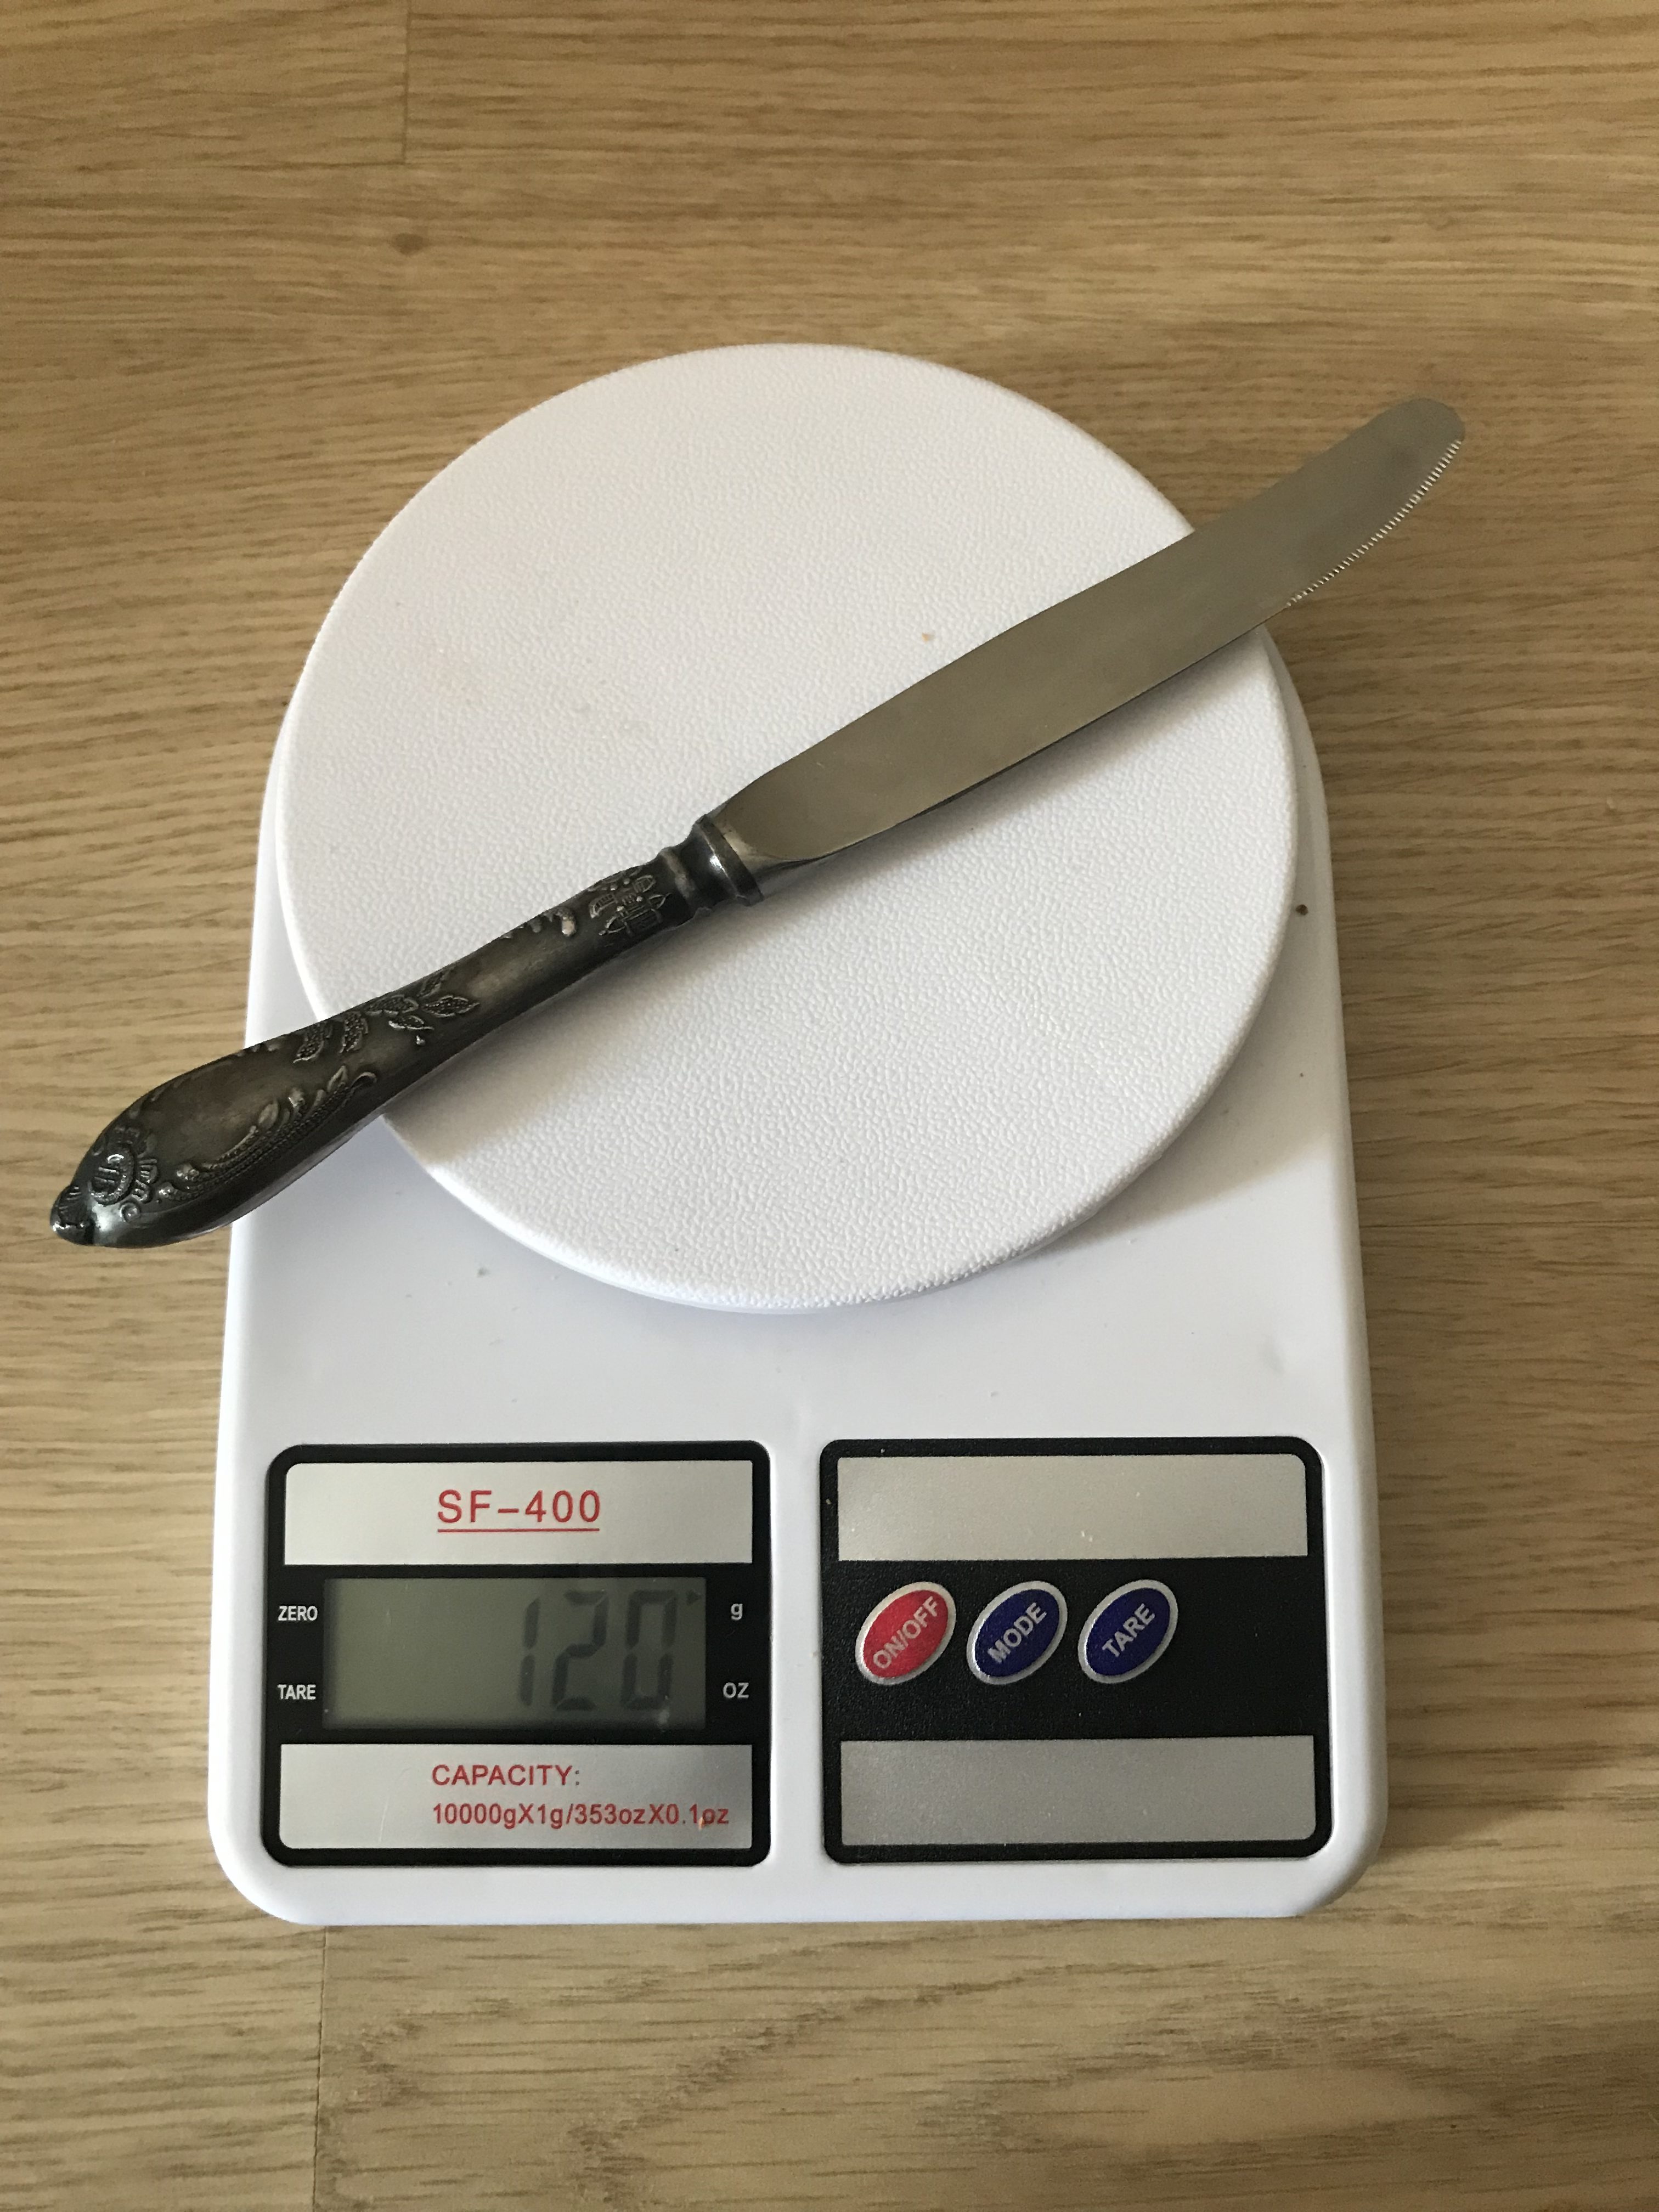 How much does a table knife weigh?